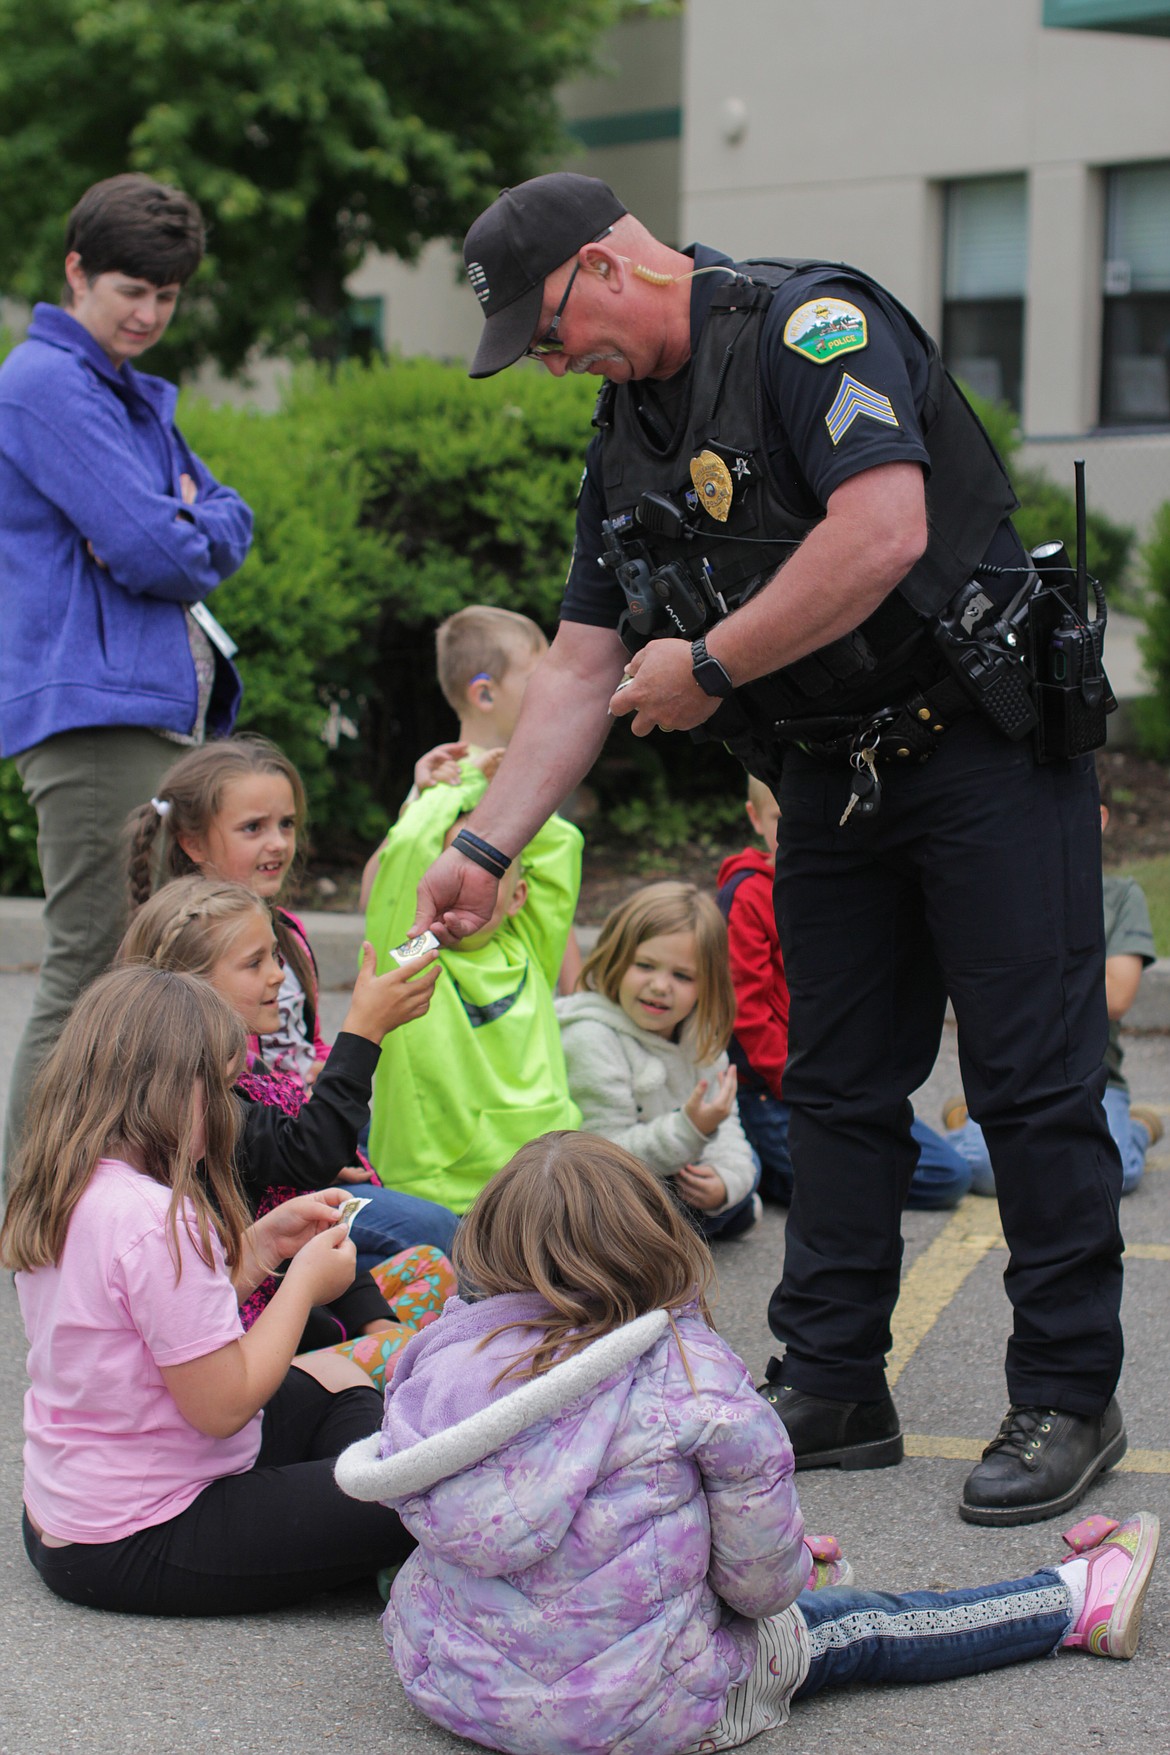 Sgt. Chris Davis gives stickers to students at the end of his presentation on bicycle safety at Idaho Hill Elementary Wednesday.